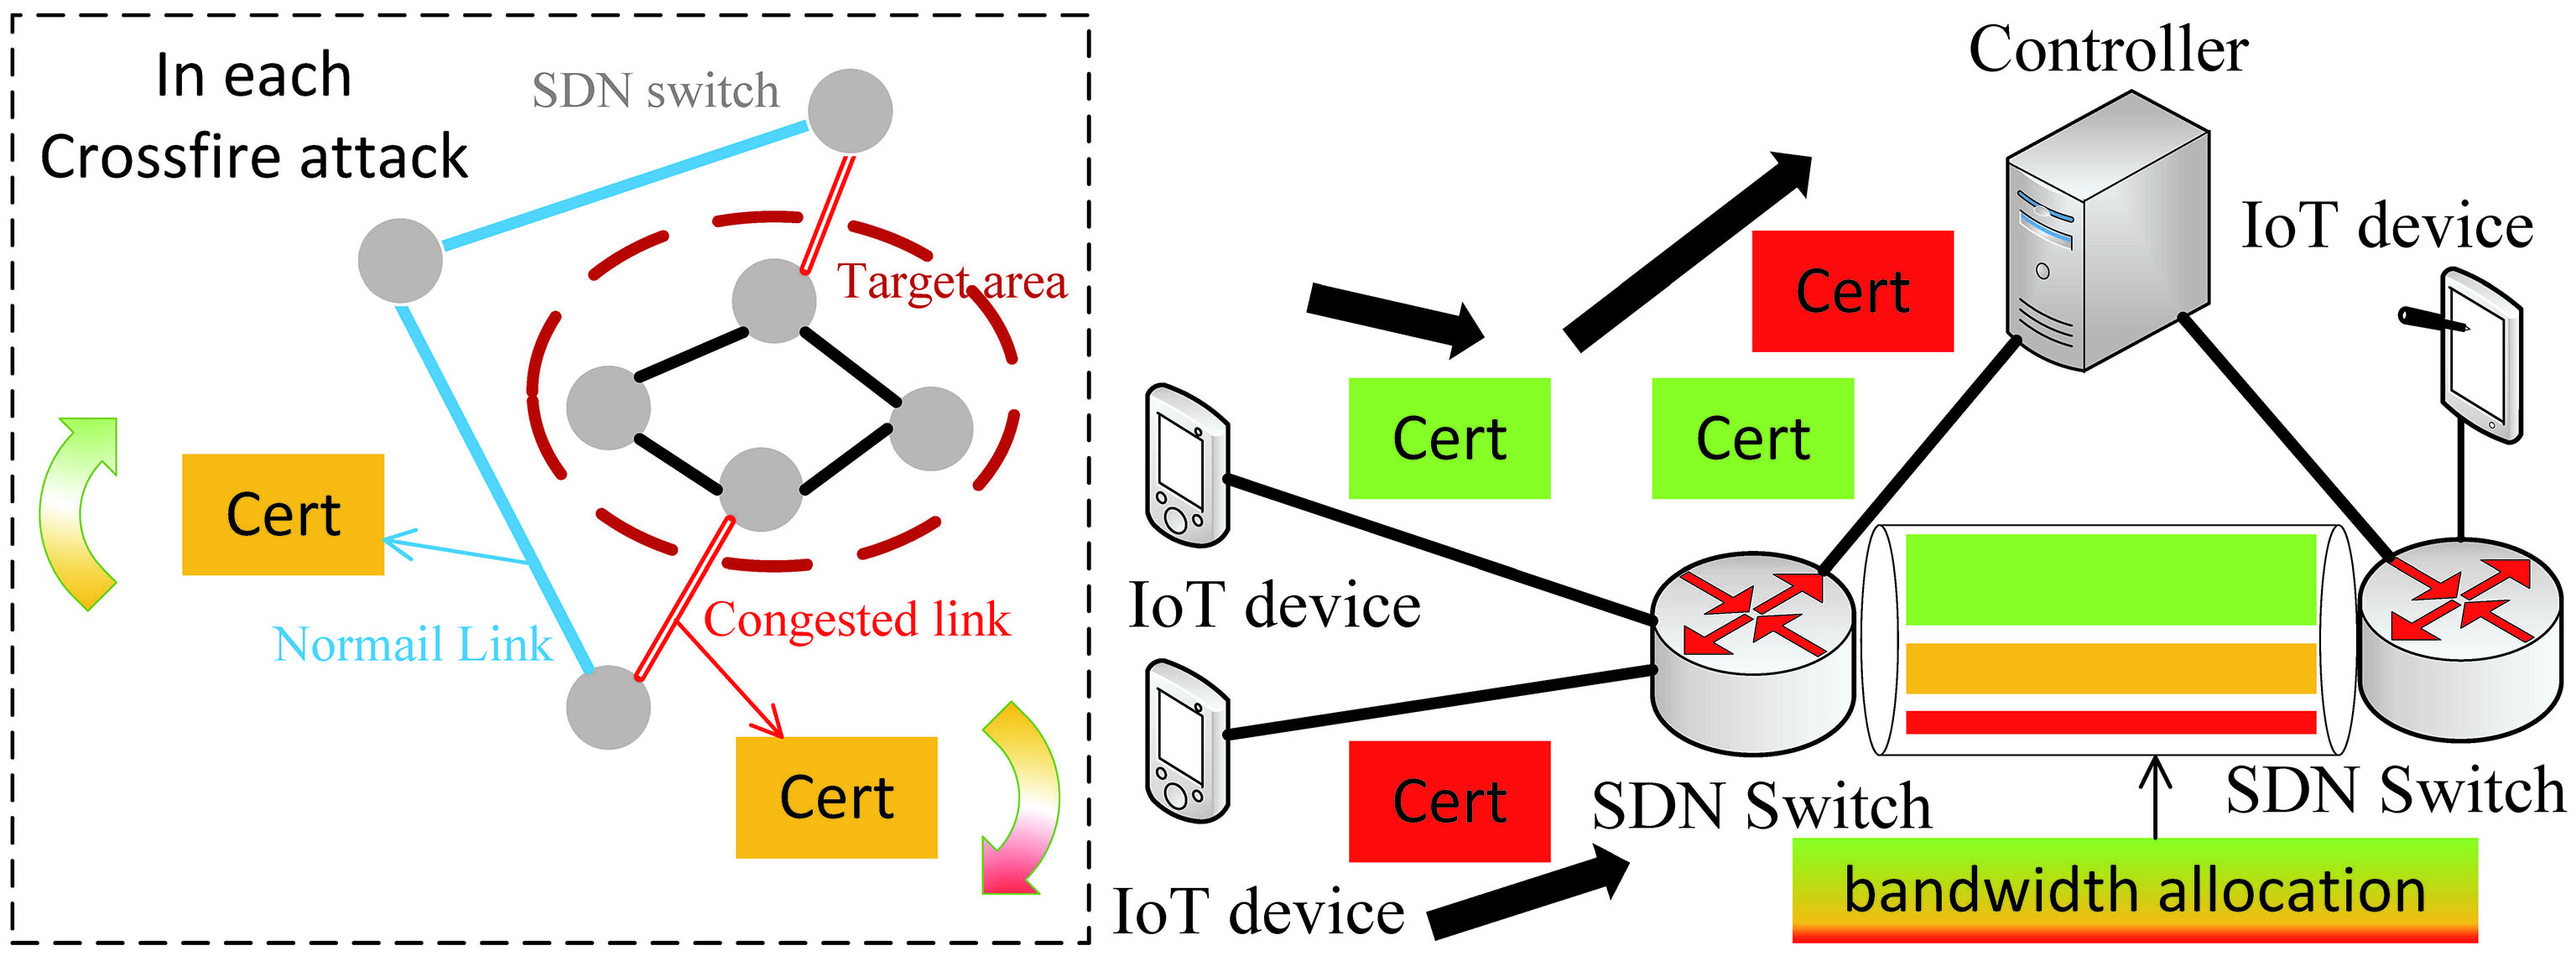 Certrust: An SDN-Based Framework for the Trust of Certificates against Crossfire Attacks in IoT Scenarios